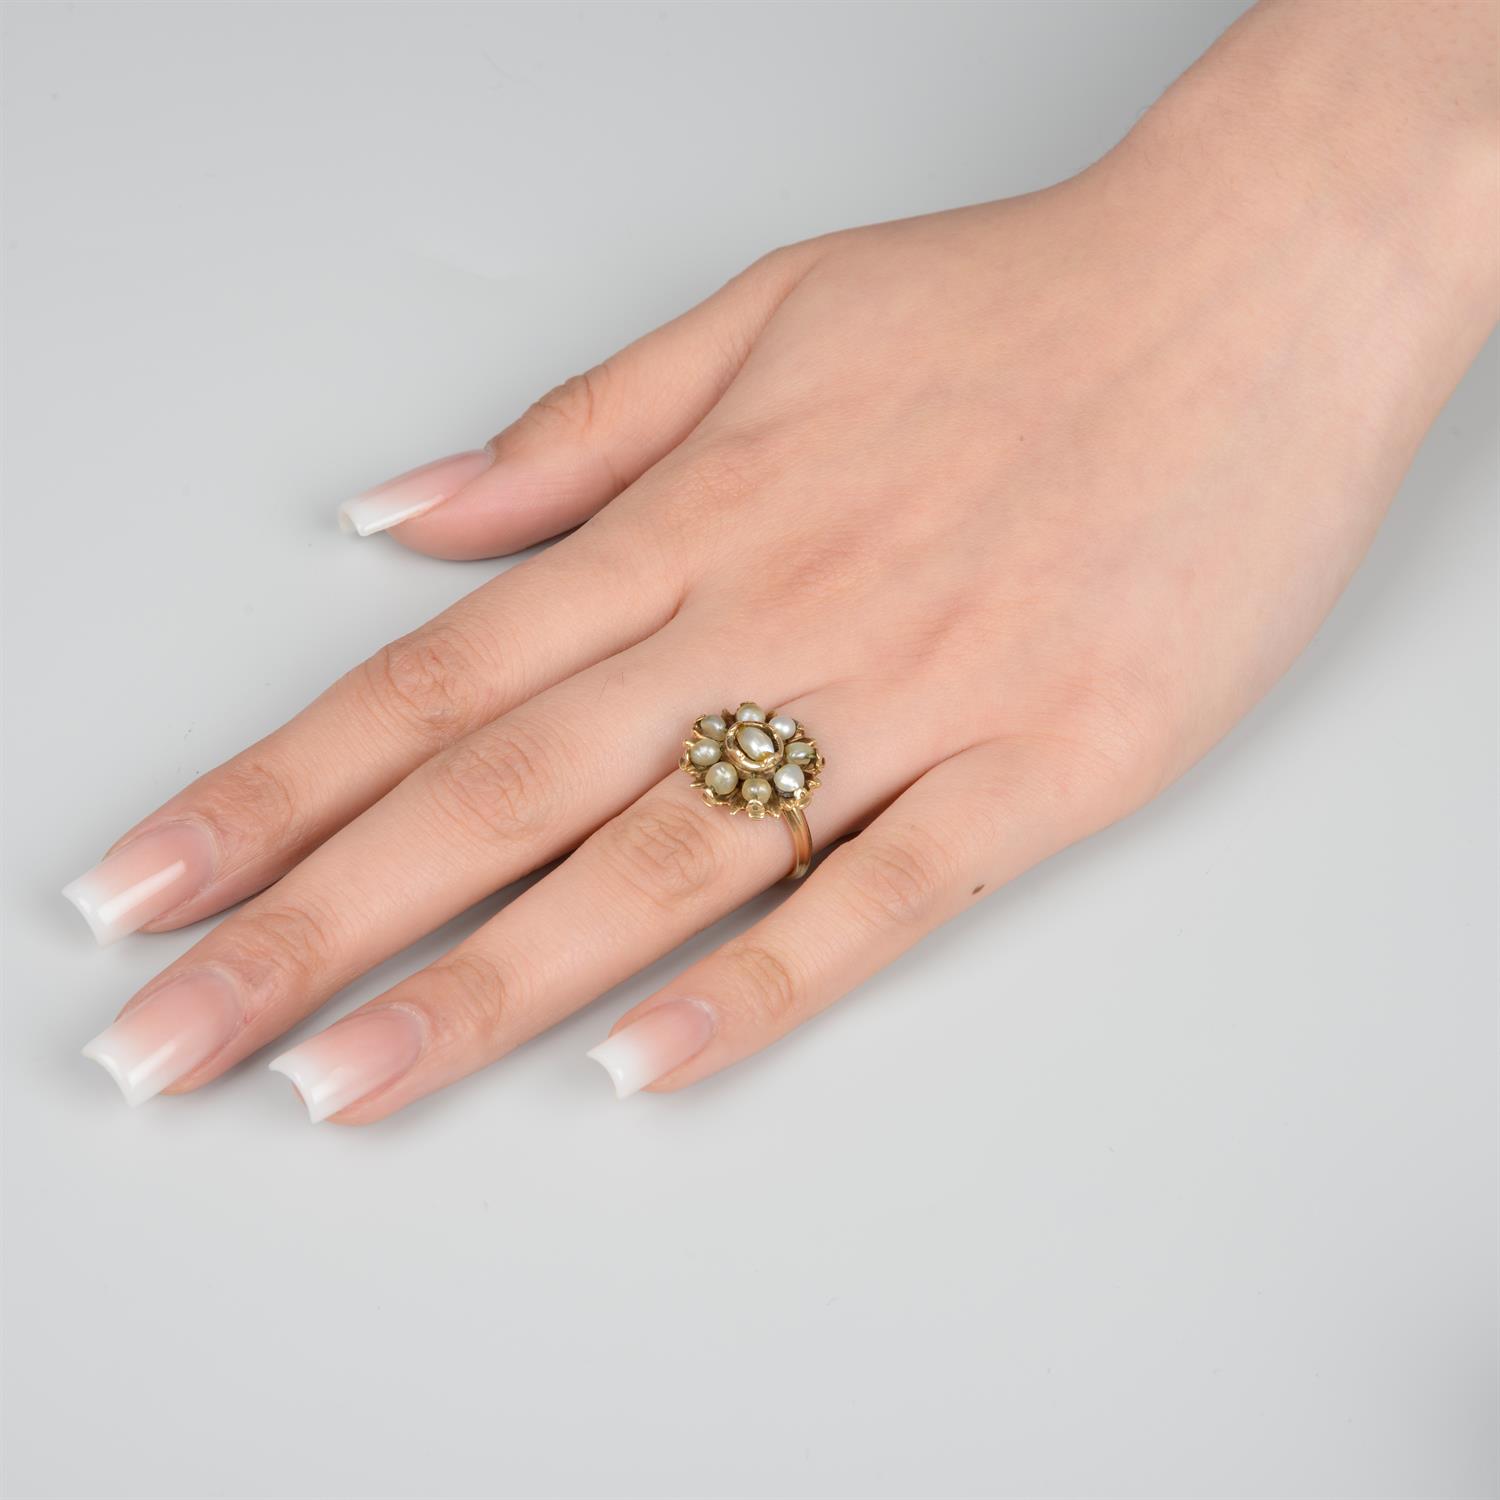 17th century gold seed pearl ring - Image 5 of 5